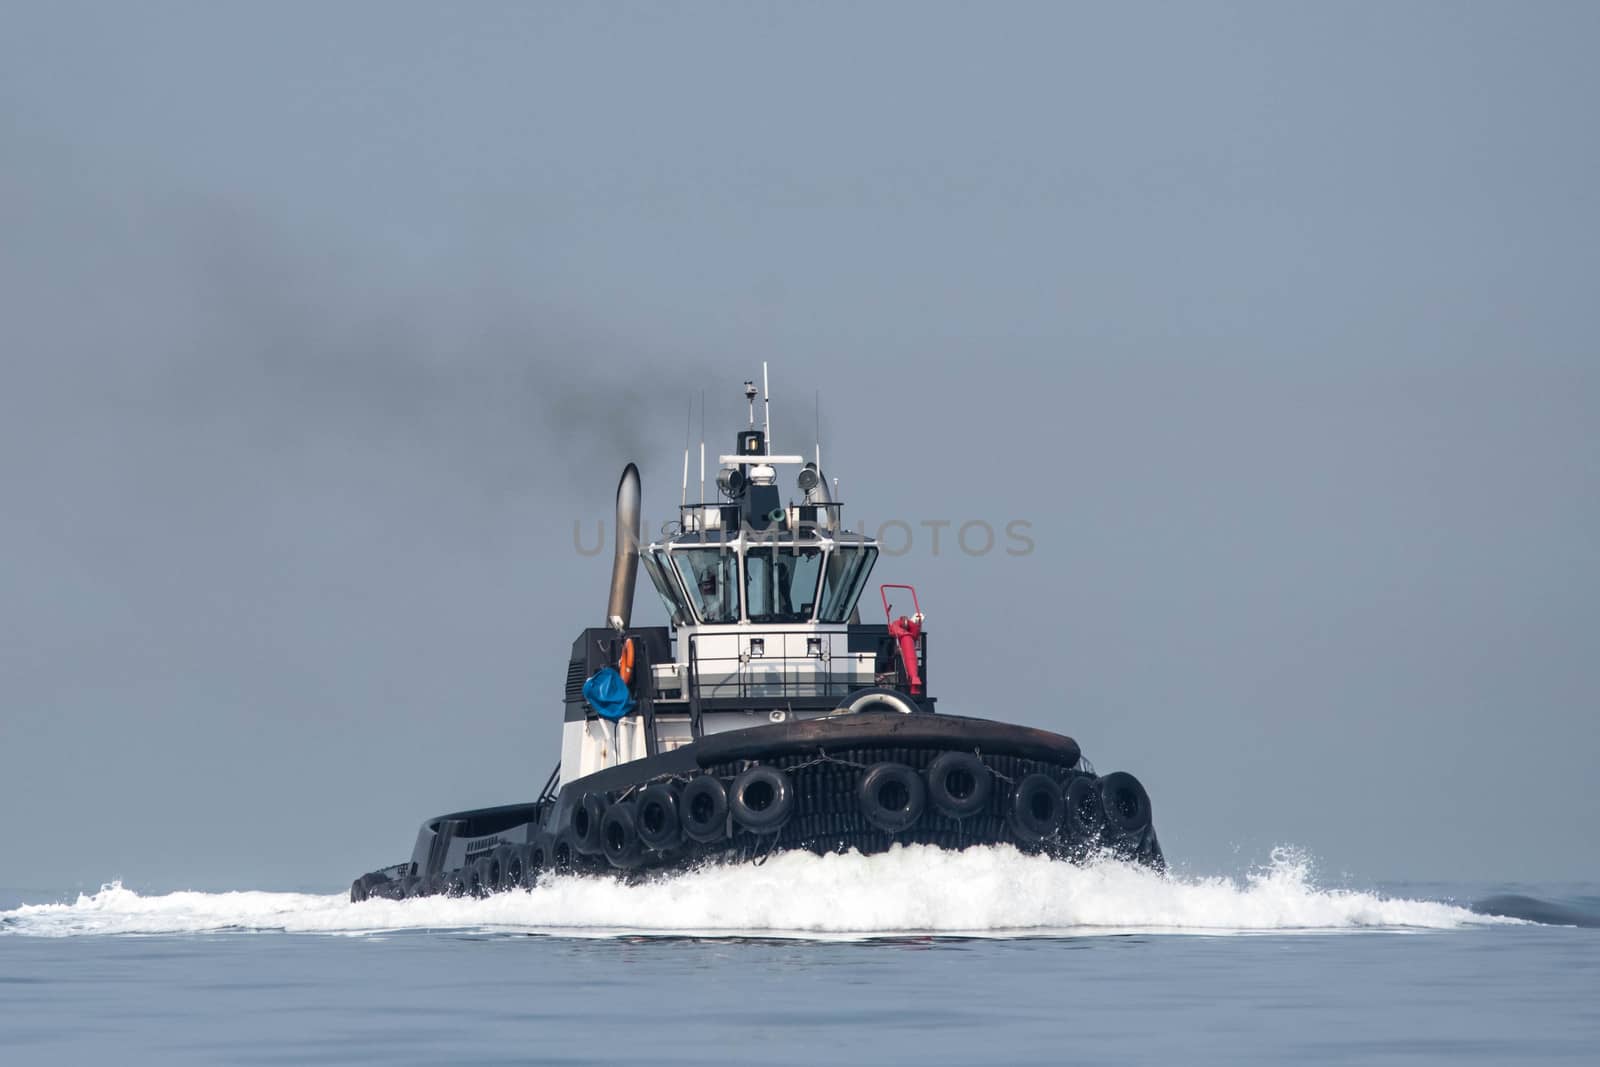 Ocean Going Tug Underway on Puget Sound by cestes001